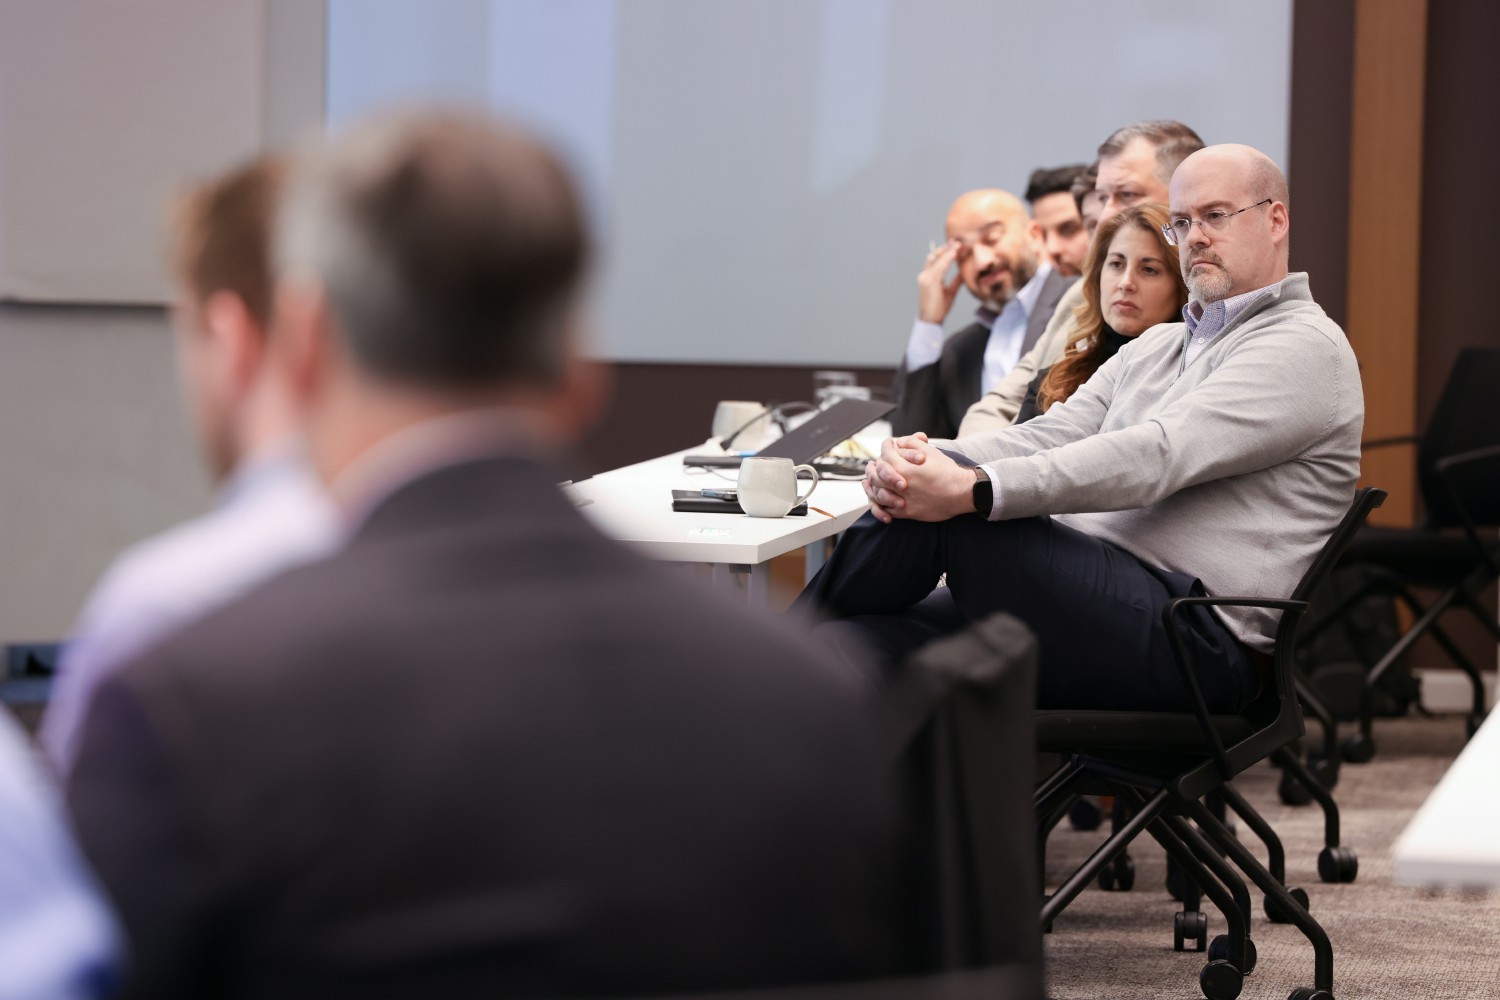 A group of Coface employees listen to a discussion with our Group CEO during a special visit to the United States.